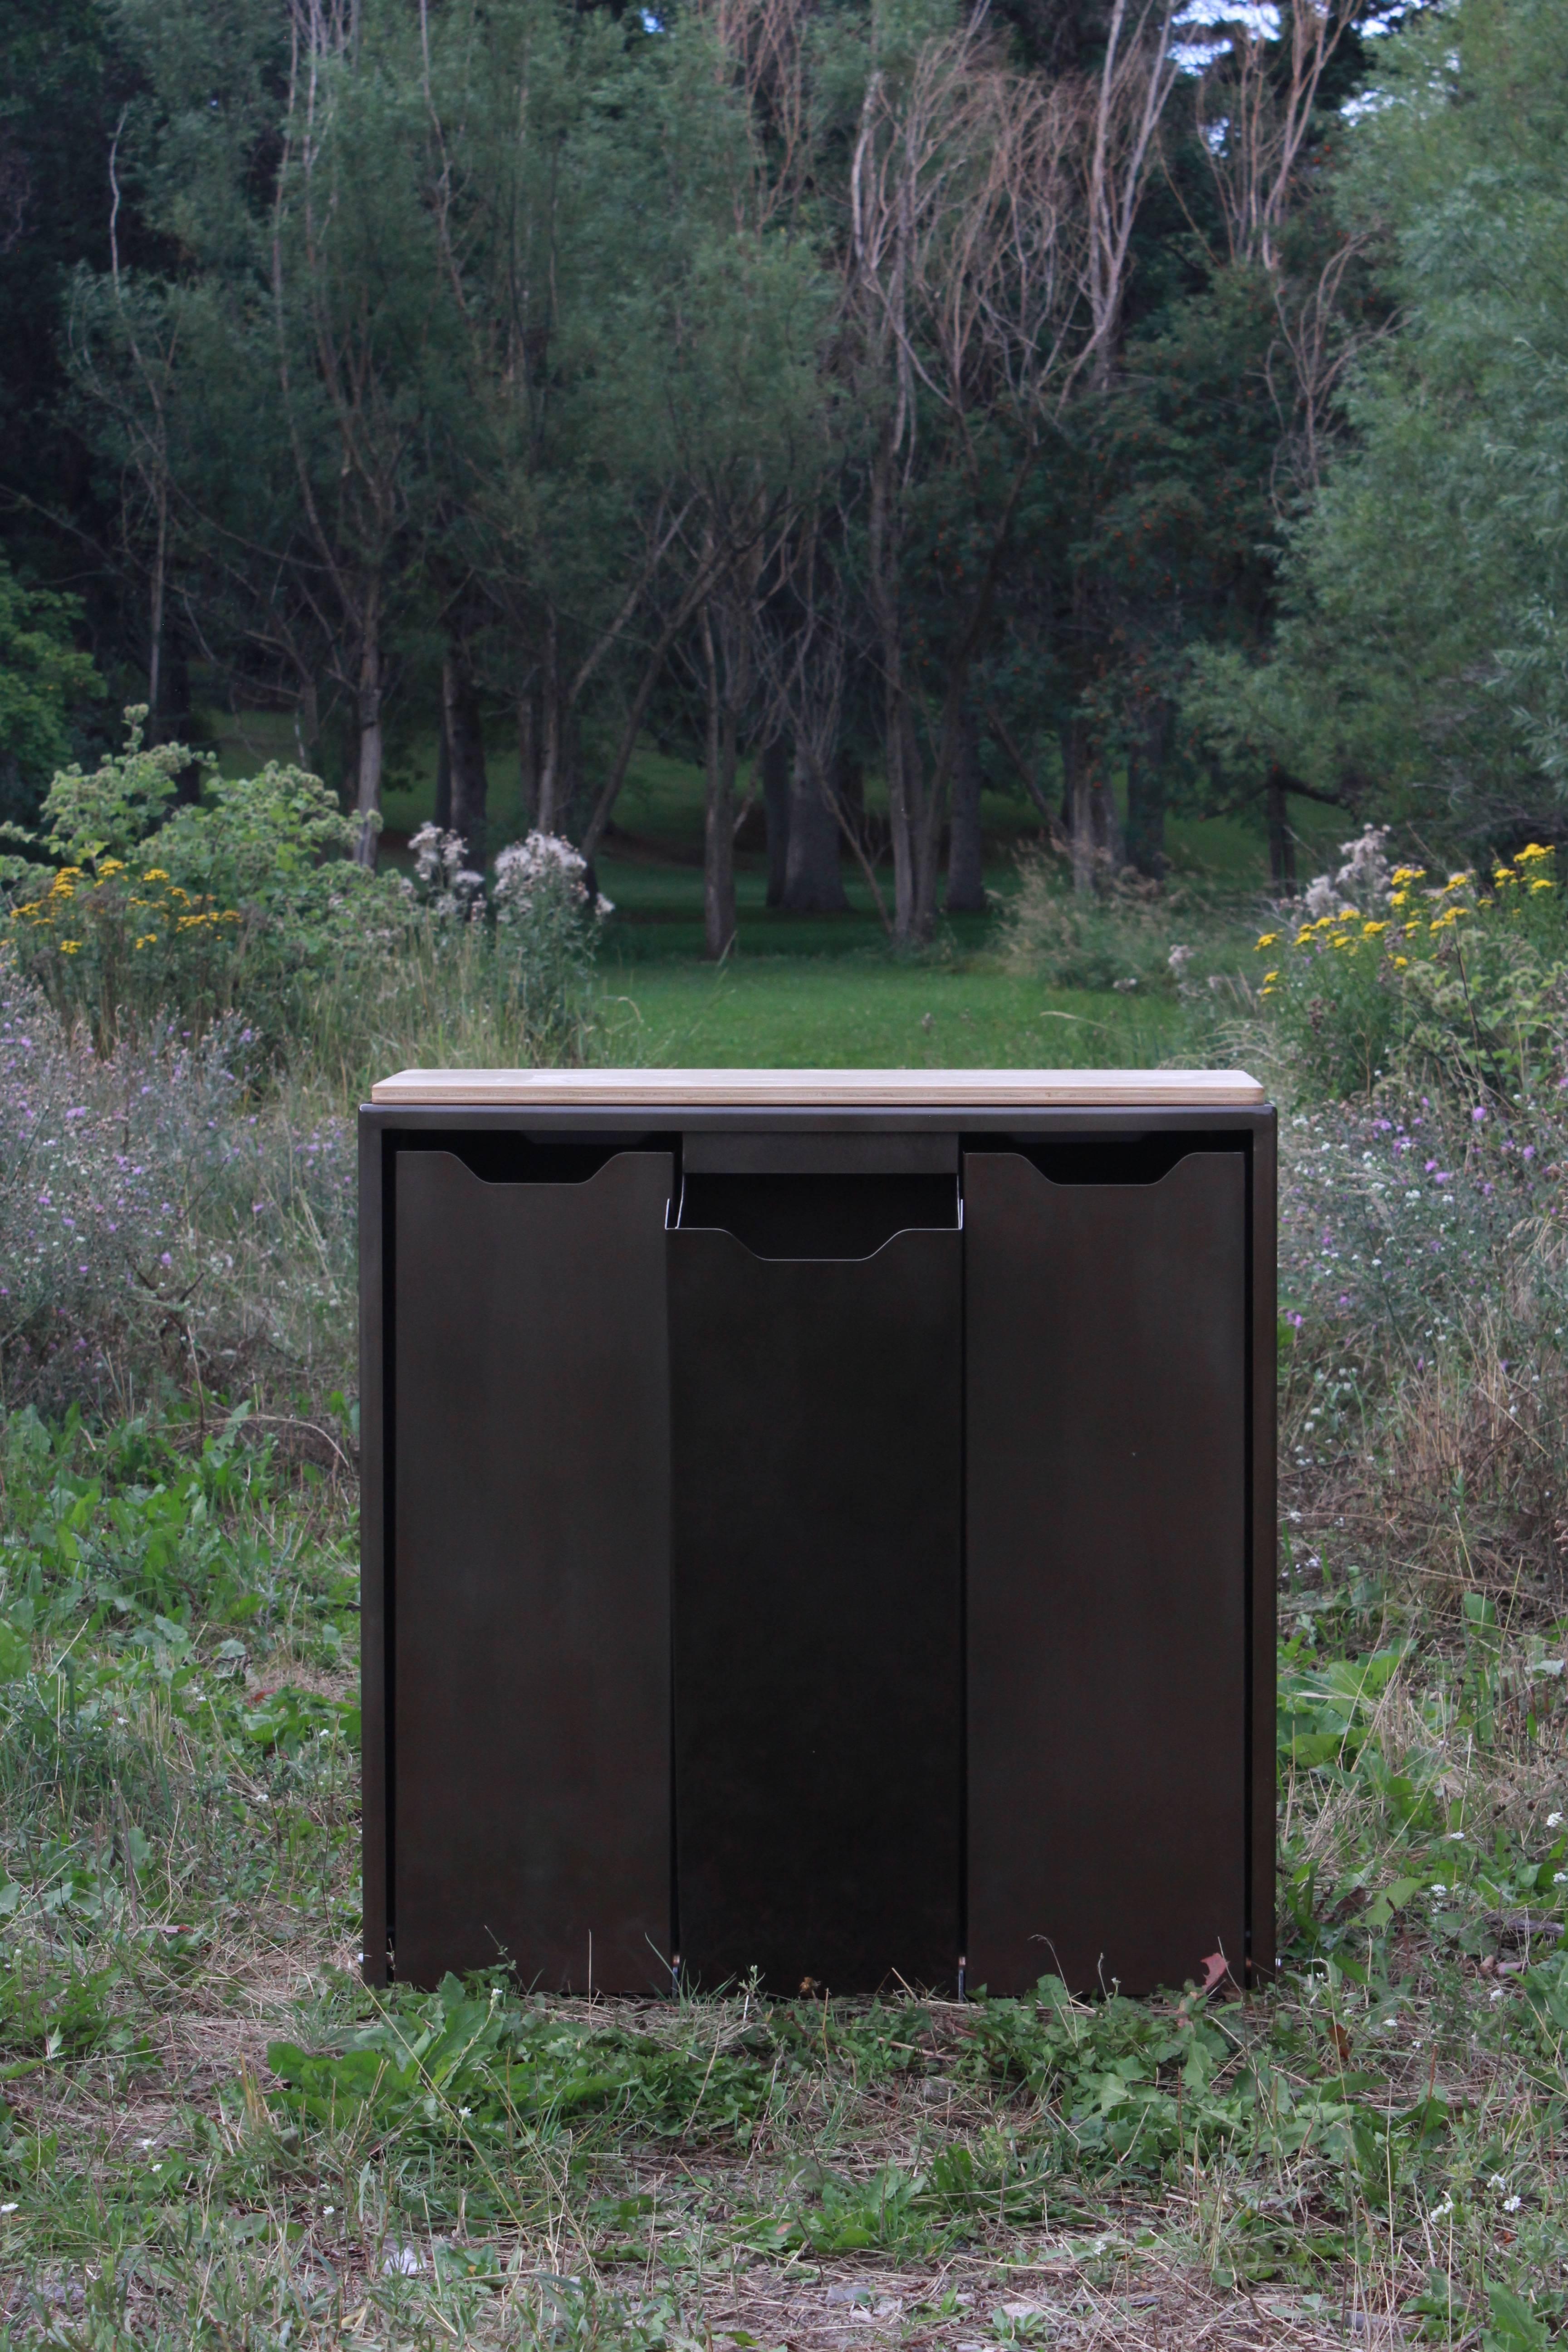 Hand-Crafted Three-Bay Bin, a Modern Solution to a Variety of Storage Problems